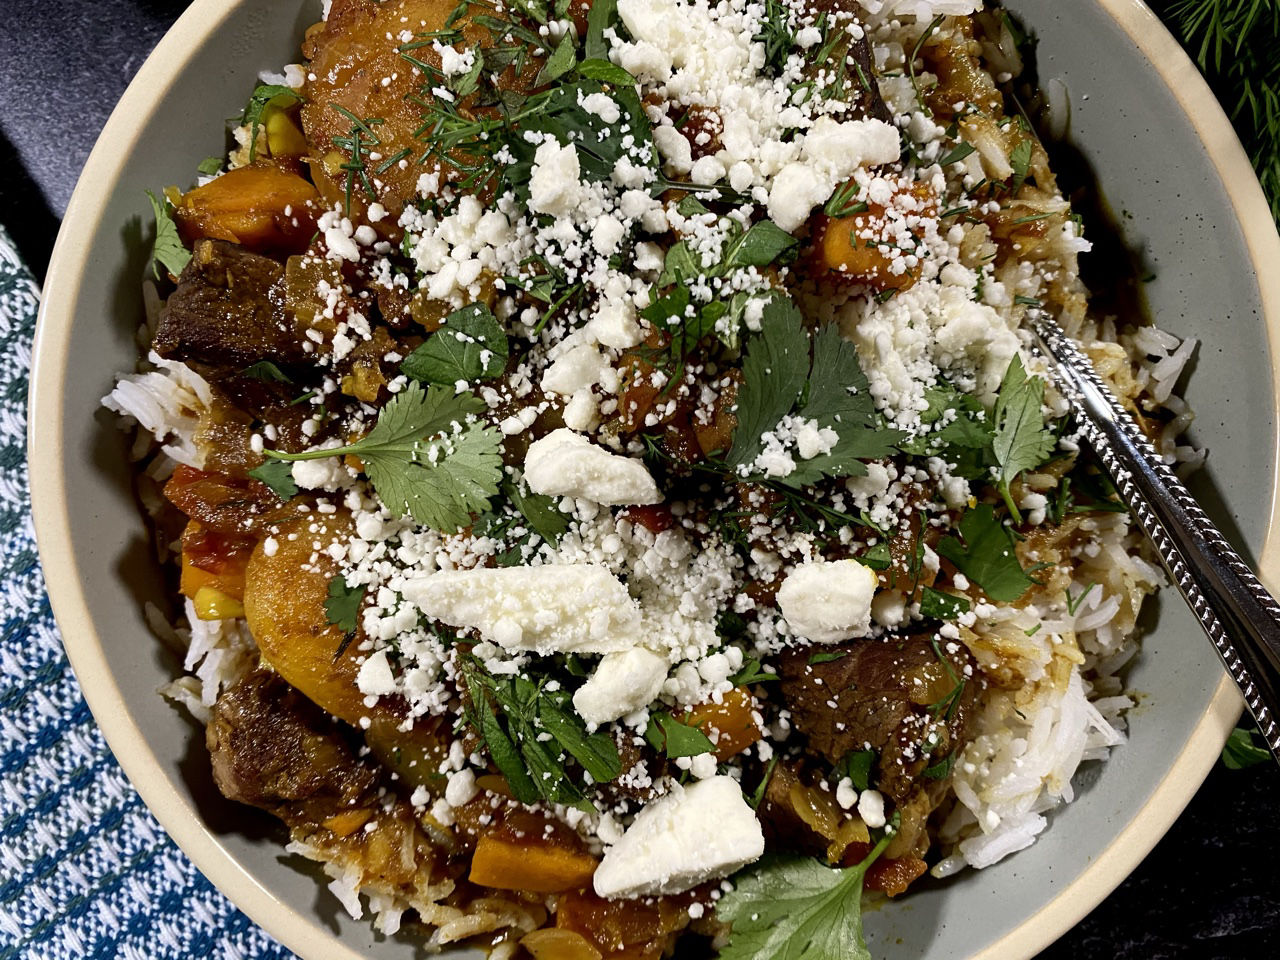 6567D8AE 576A 47D9 B2B7 856B7CF4FB62 - Persian Style Lamb & Sweet Potato Stew with Apricots & Herbs